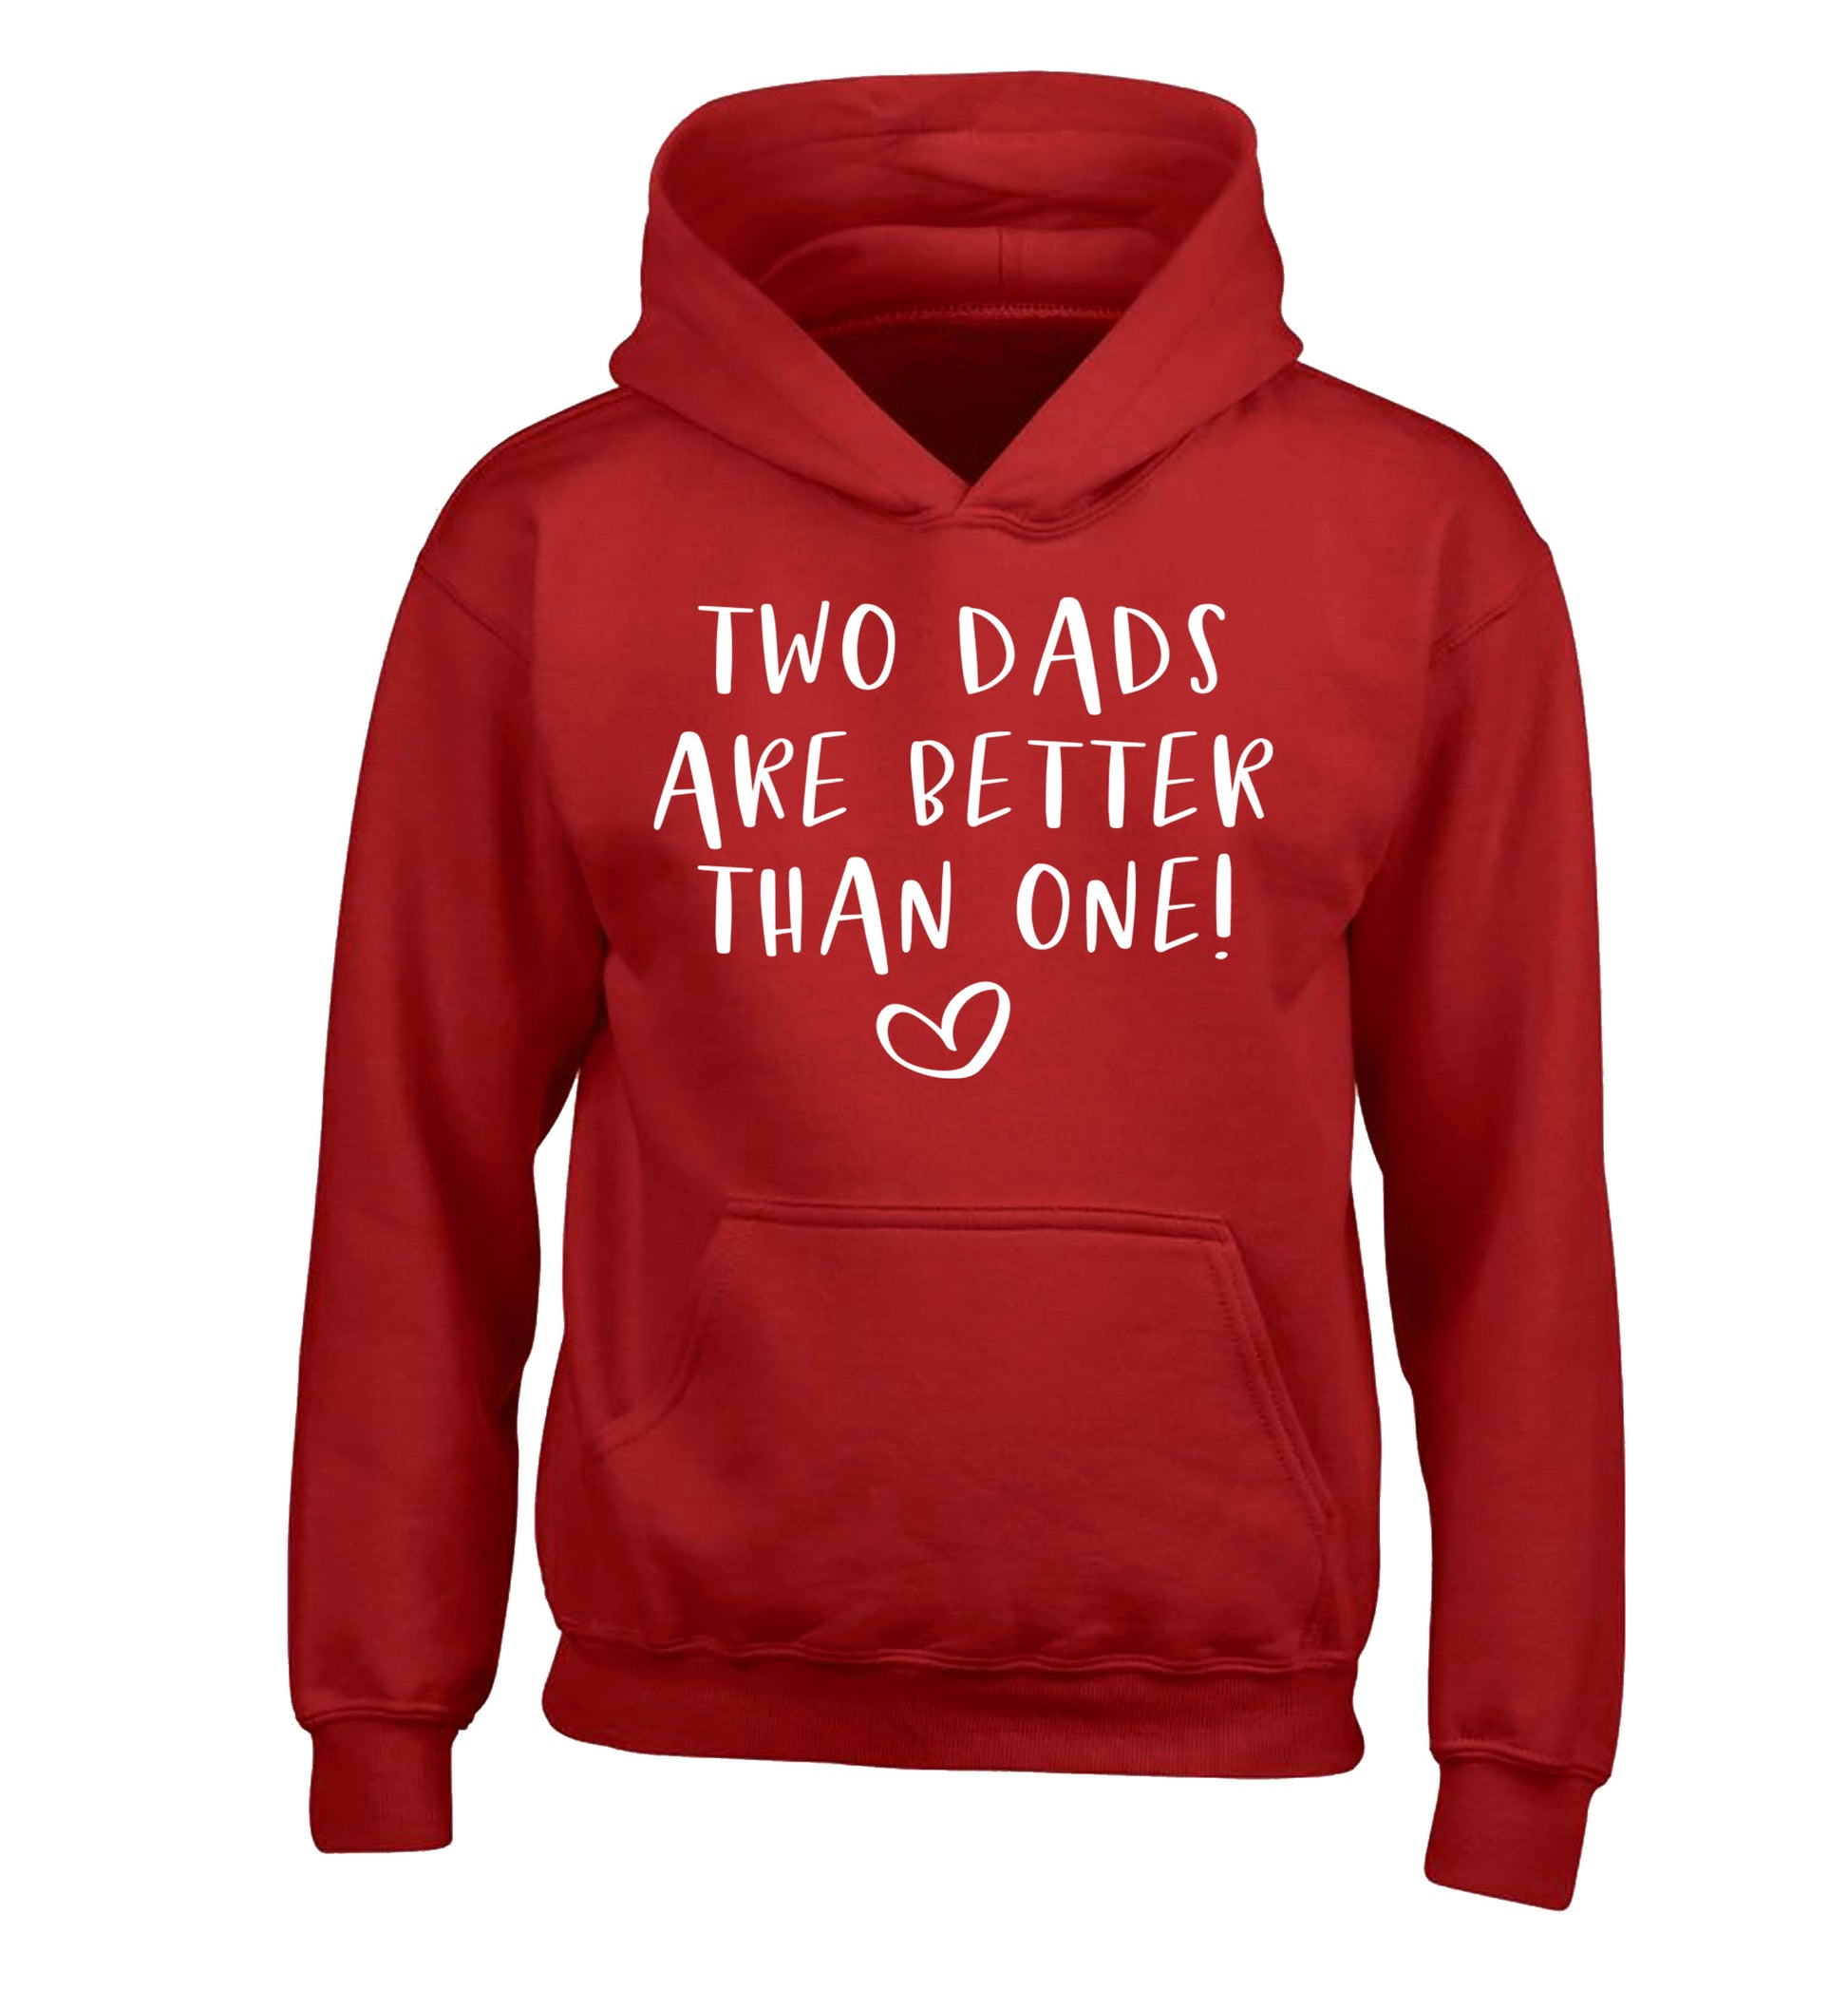 Two dads are better than one children's red hoodie 12-13 Years